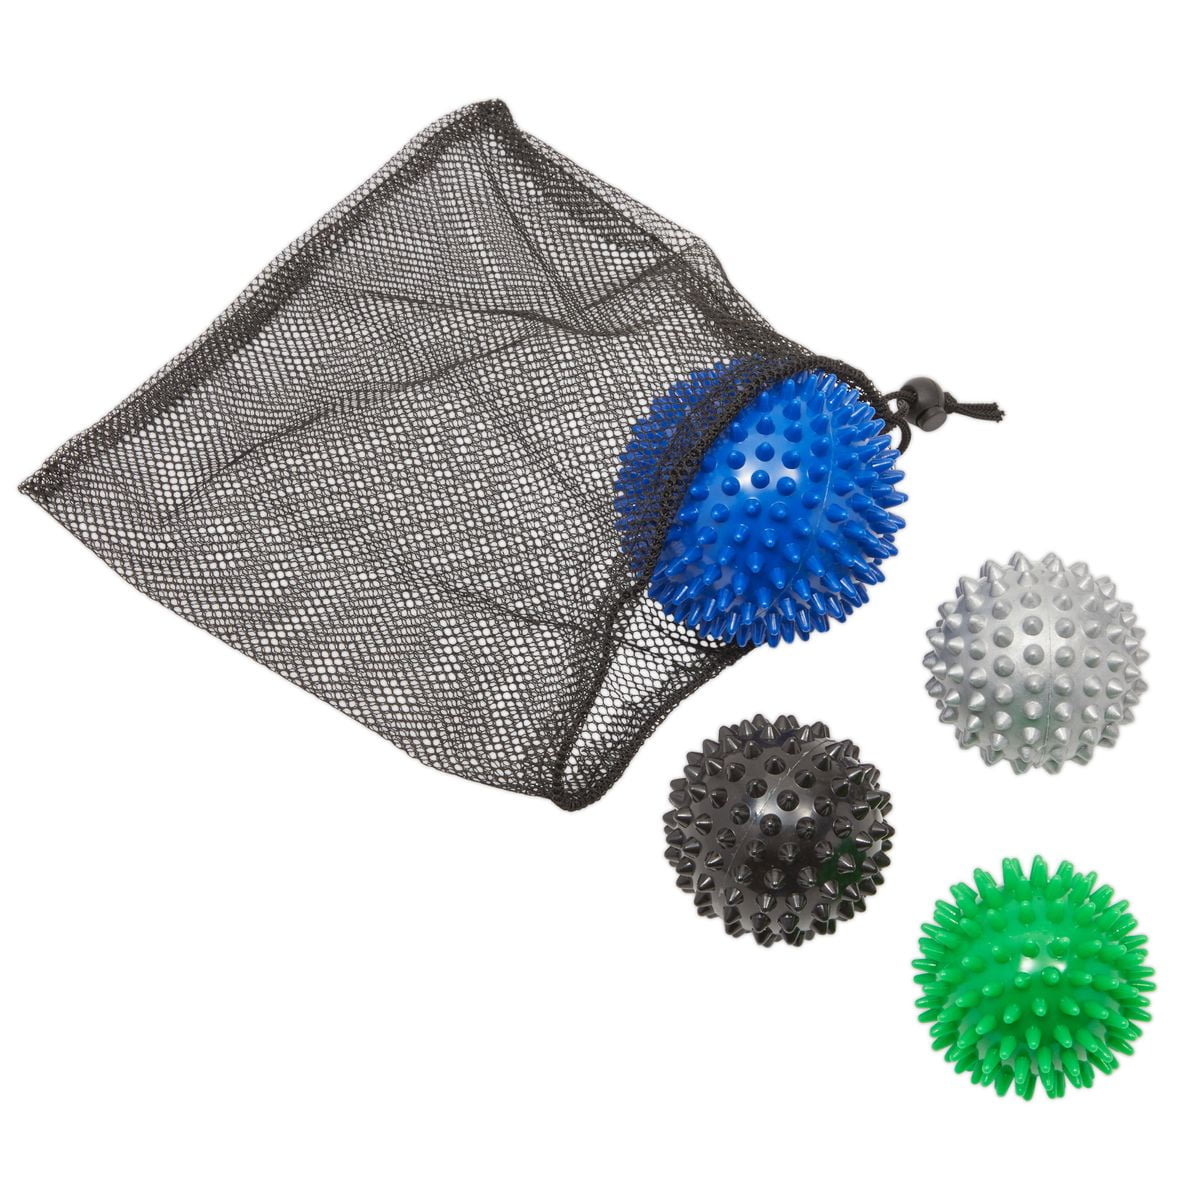 4 Pcs Set Spiky Trigger Point Roller Plantar Fasciitis Massage Acupuncture Ball for Foot Feet Set with Carrying Bag, 3 in